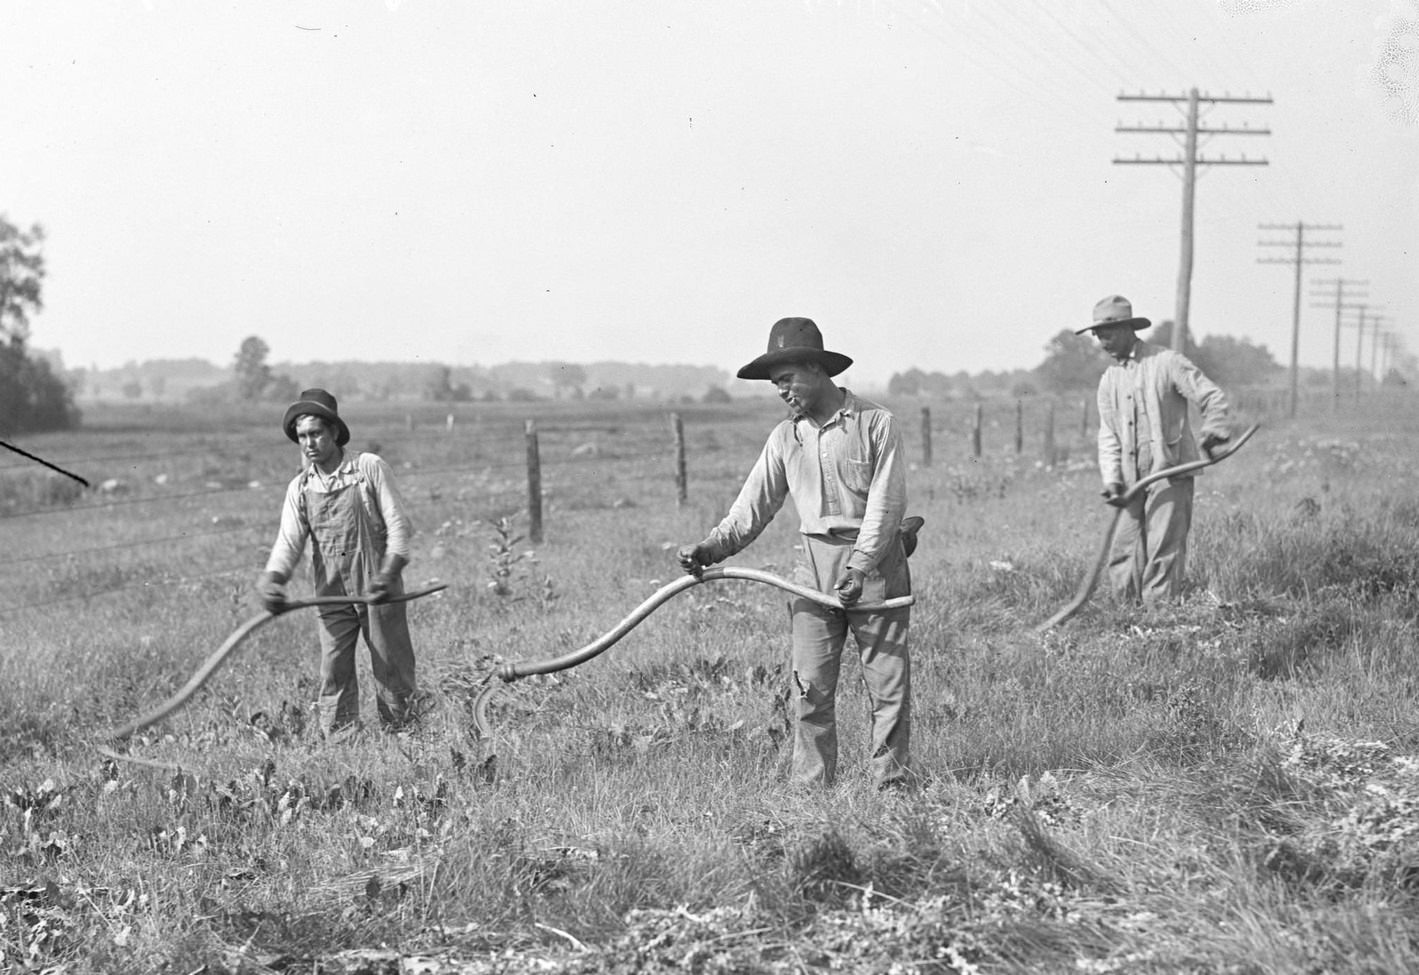 Mexican immigrants working with sickles to cut weeds along the side of a road, Chicago, Illinois, 1917.